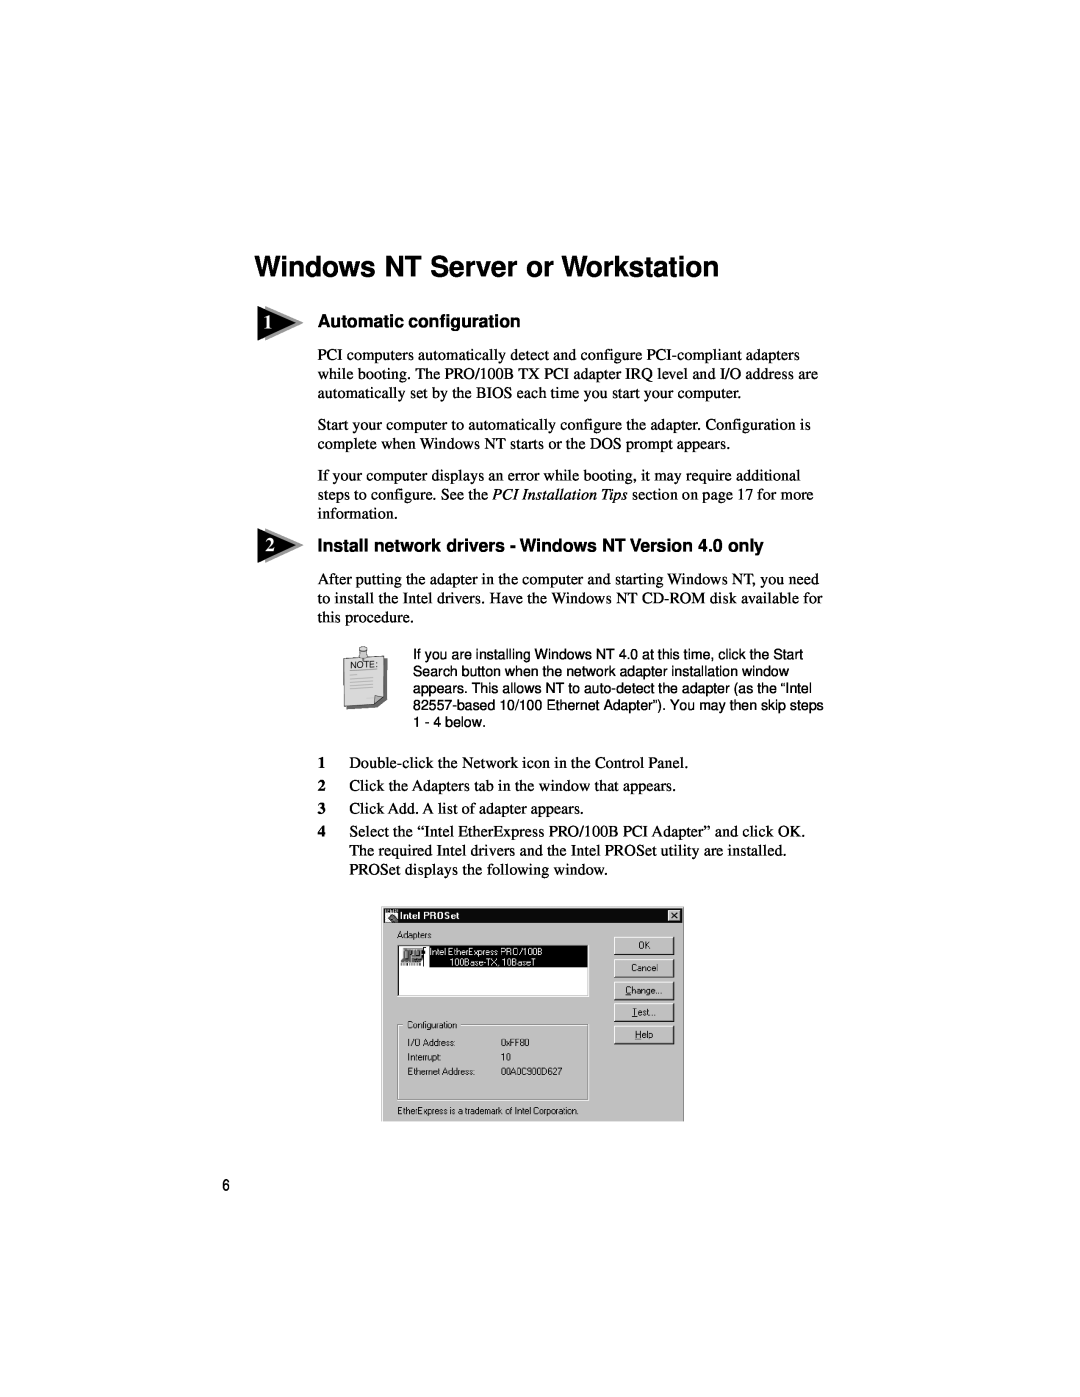 Intel PRO/100 TX PCI manual Windows NT Server or Workstation, Install network drivers - Windows NT Version 4.0 only 